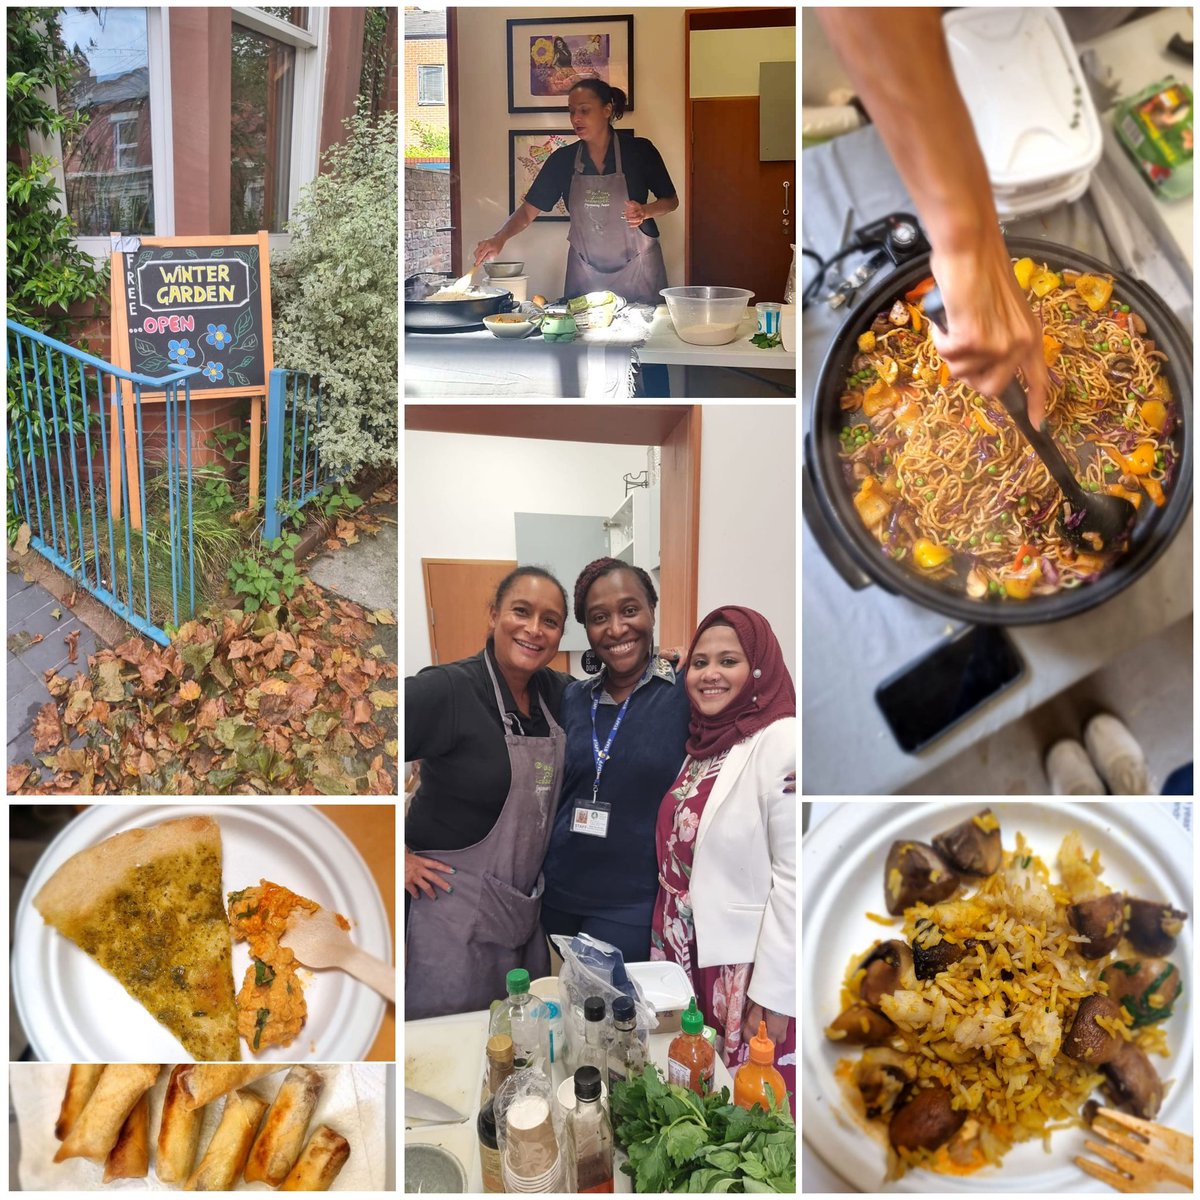 Our Outreach Worker Miatta is @GardeningGranby today 💚 Supporting our amazing Trustee Michelle @BaytreeCatering on her cooking demo for #WorldHeartDay as part of #BlackFest2022 Don't we all wish we were there 🤤😍 #CommunityEngagement #Workshops #FoodForThought